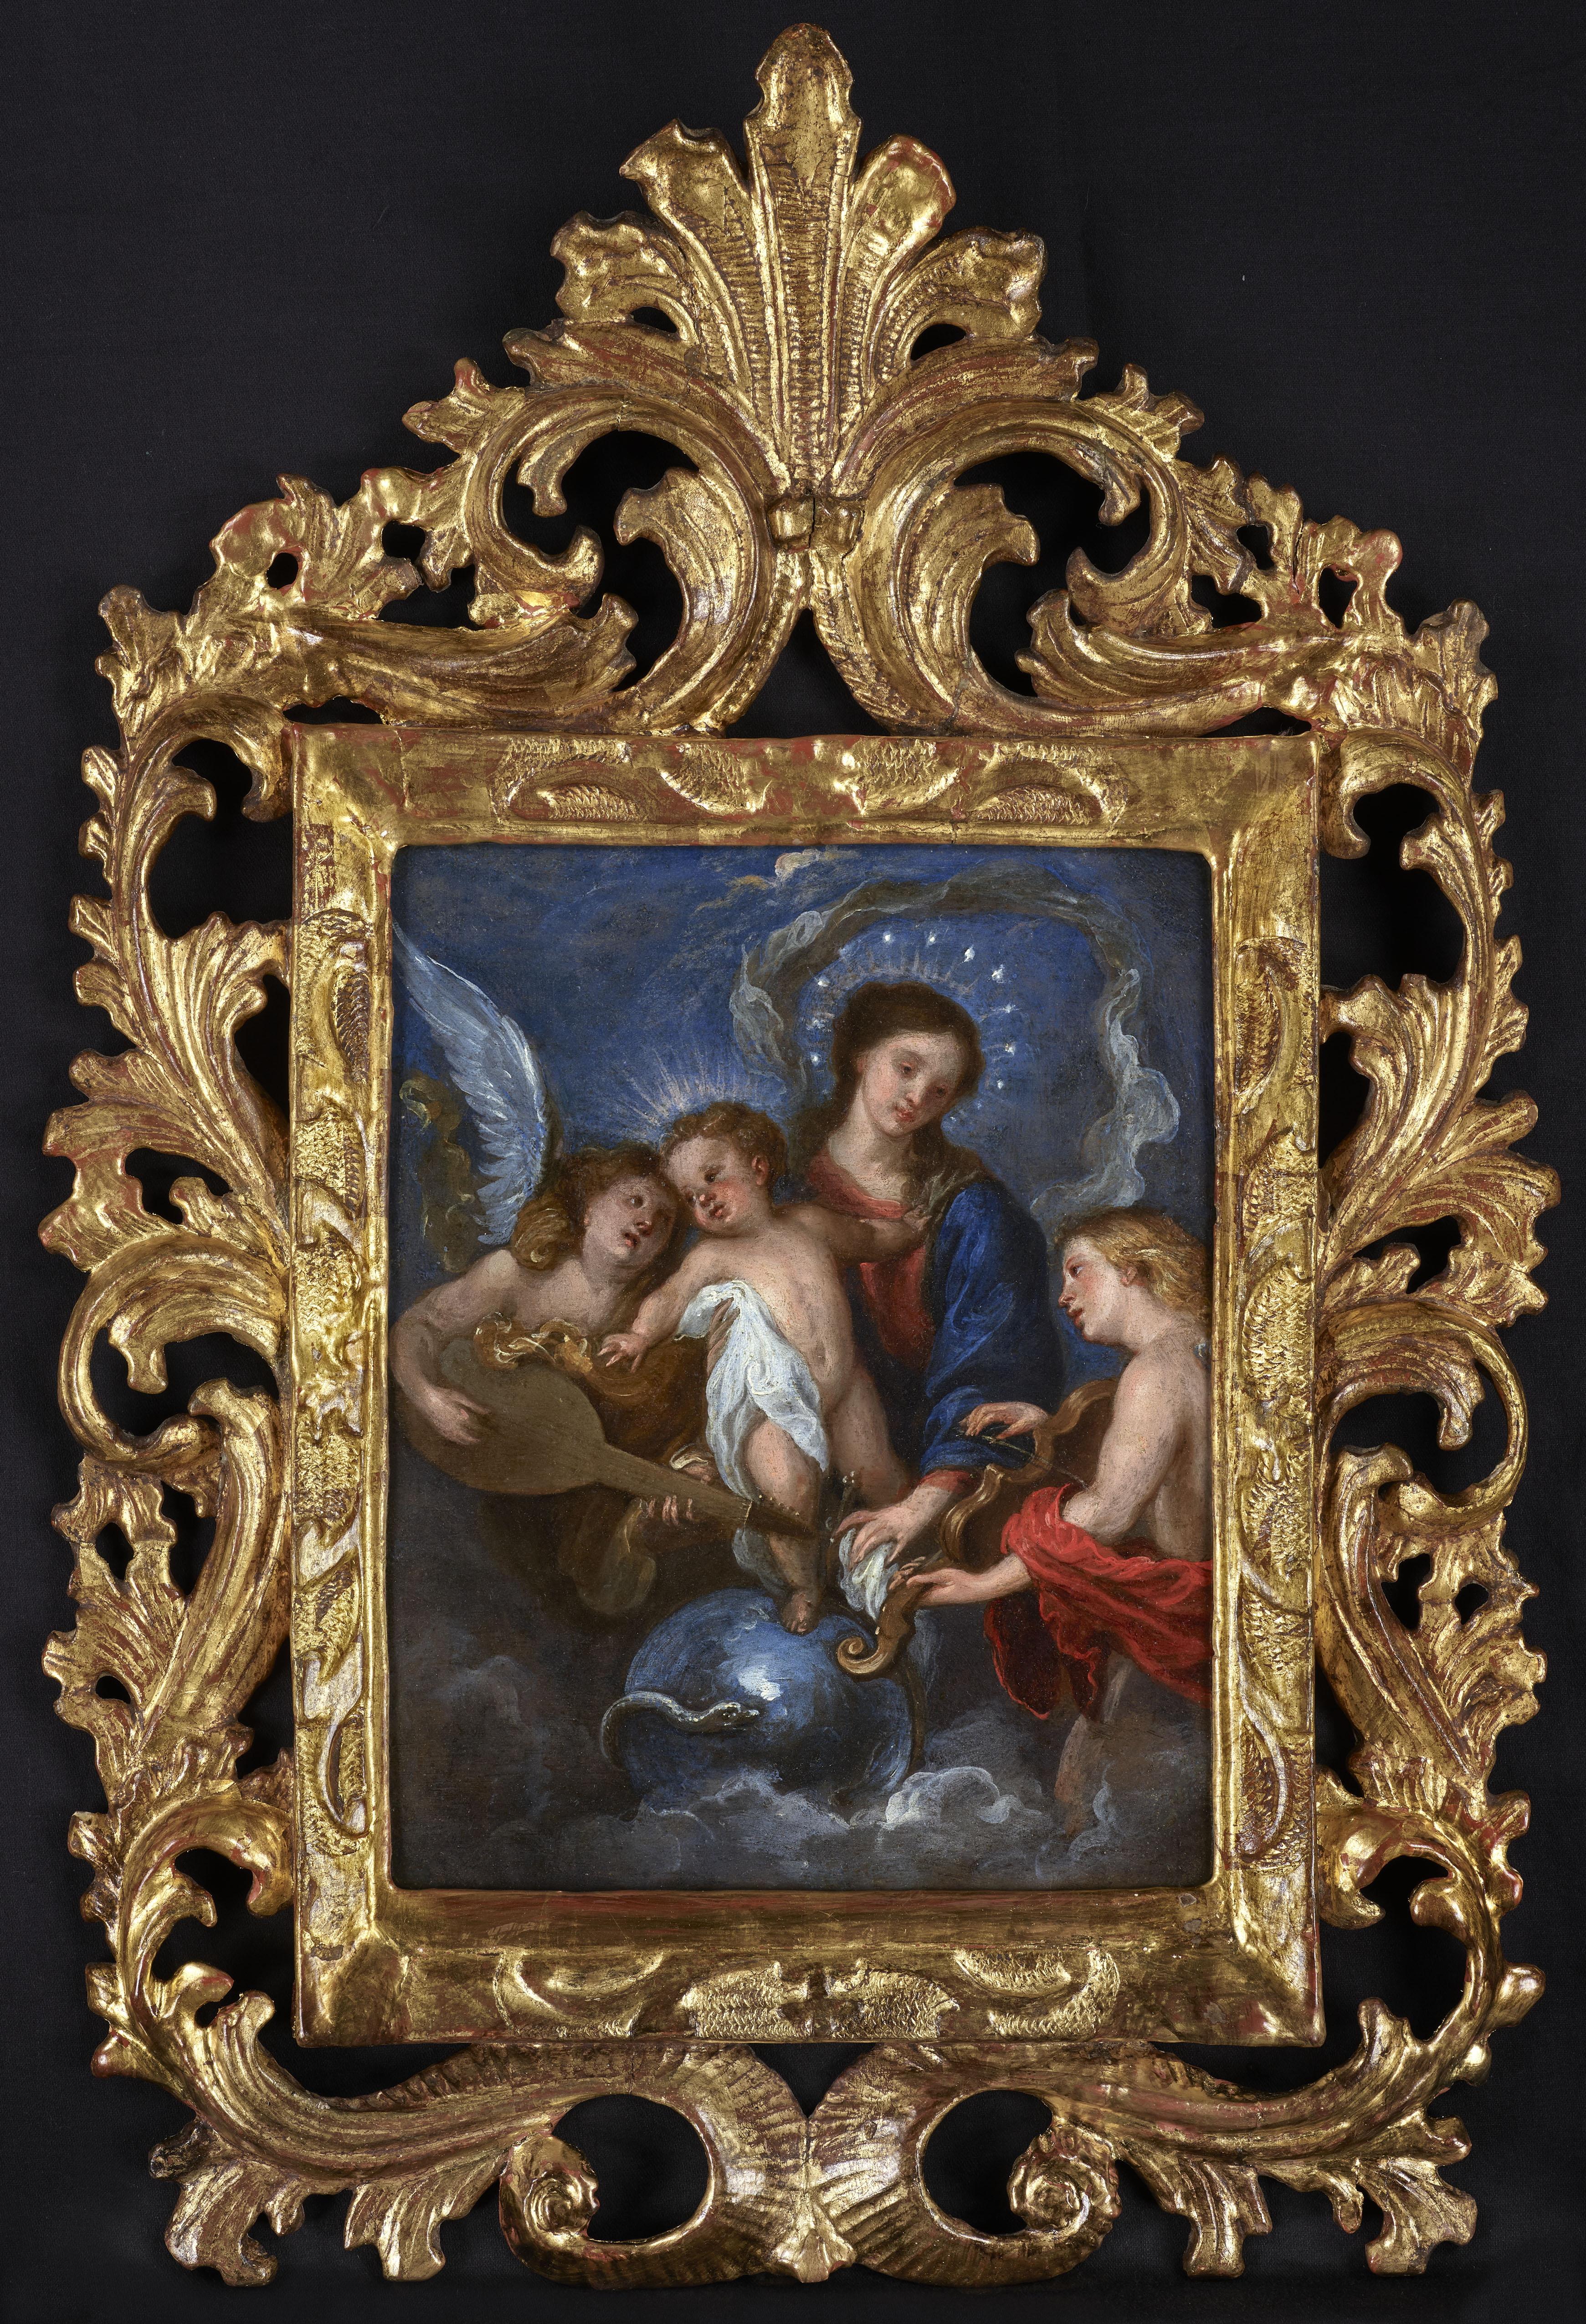 Virgin and Child with Music-Making Angels - Painting by Anthony Van Dyck